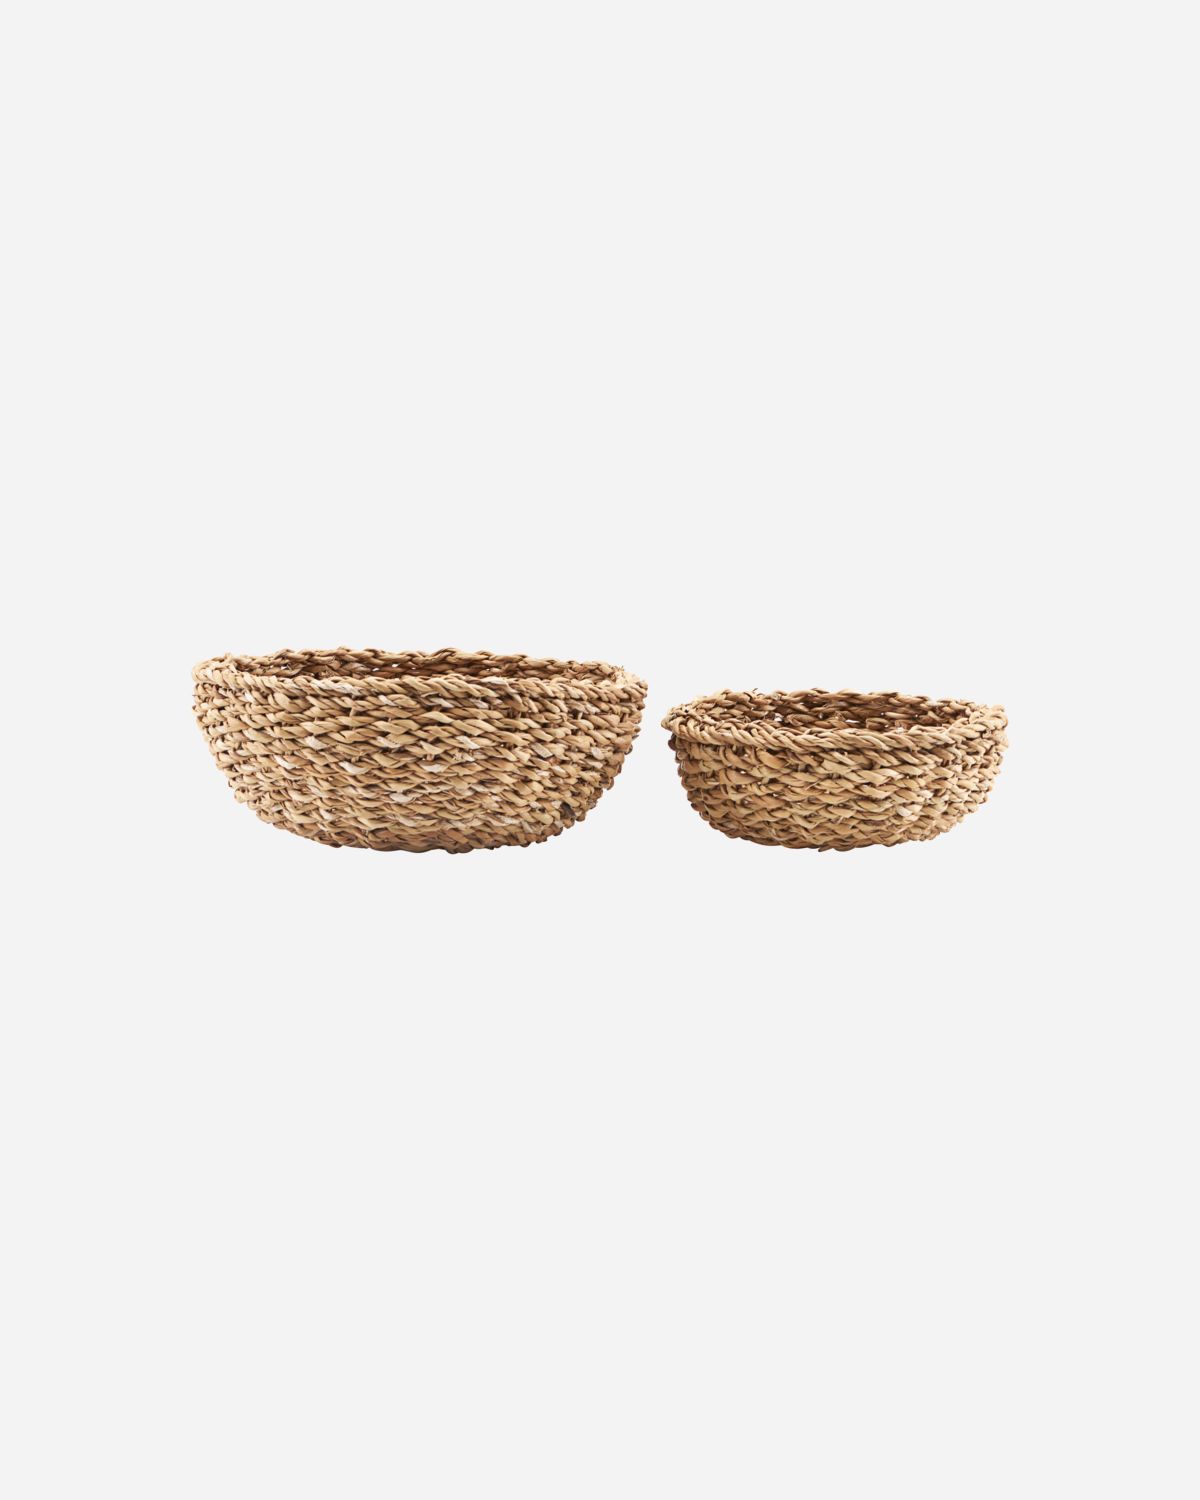 Basket, Bread, Set of 2 sizes, Size may vary